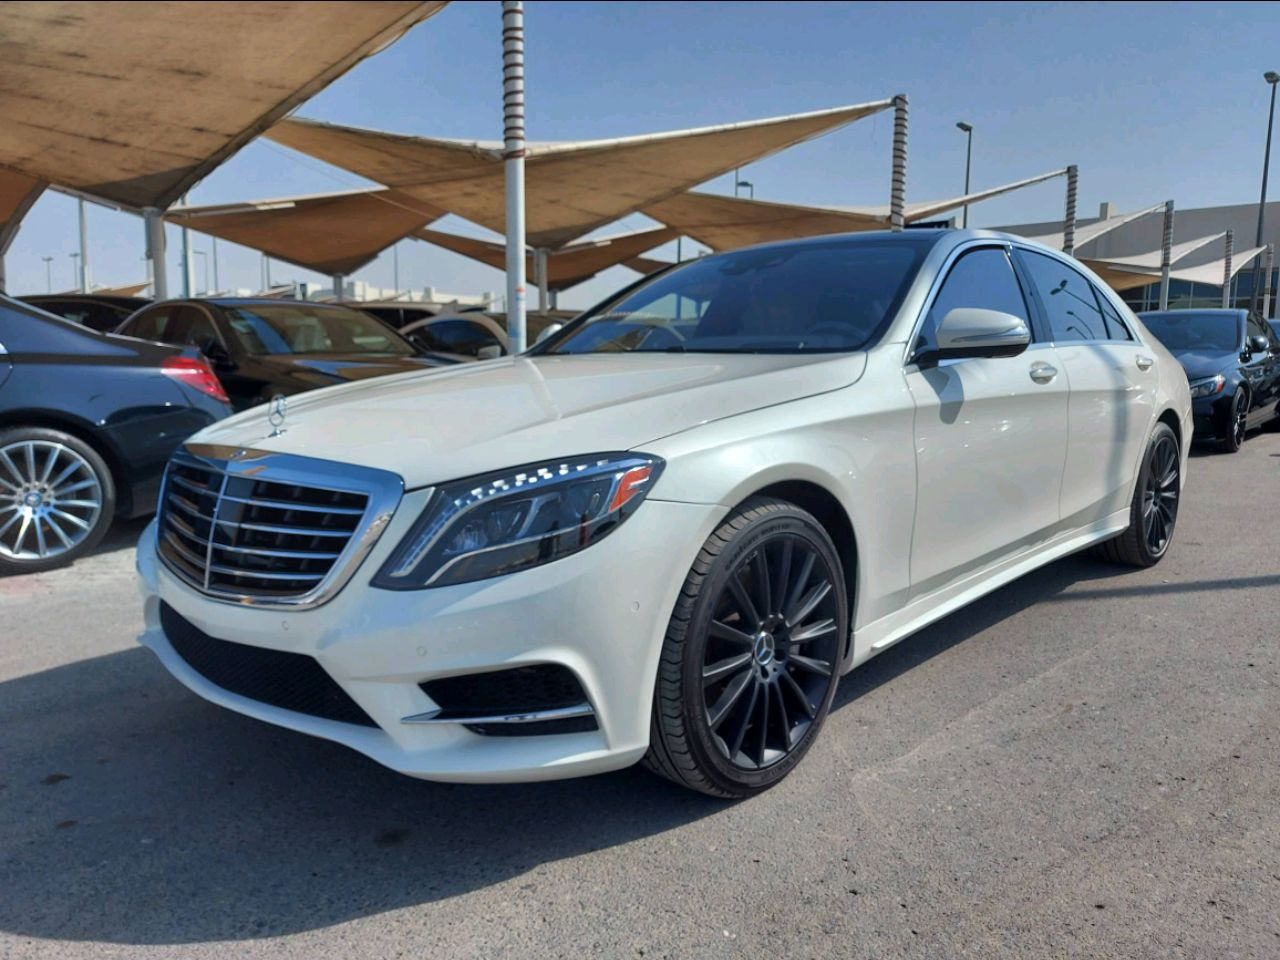 Mercedes Benz S-Class 2015 AED 160,000, Good condition, US Spec, Sunroof, Fog Lights, Negotiable